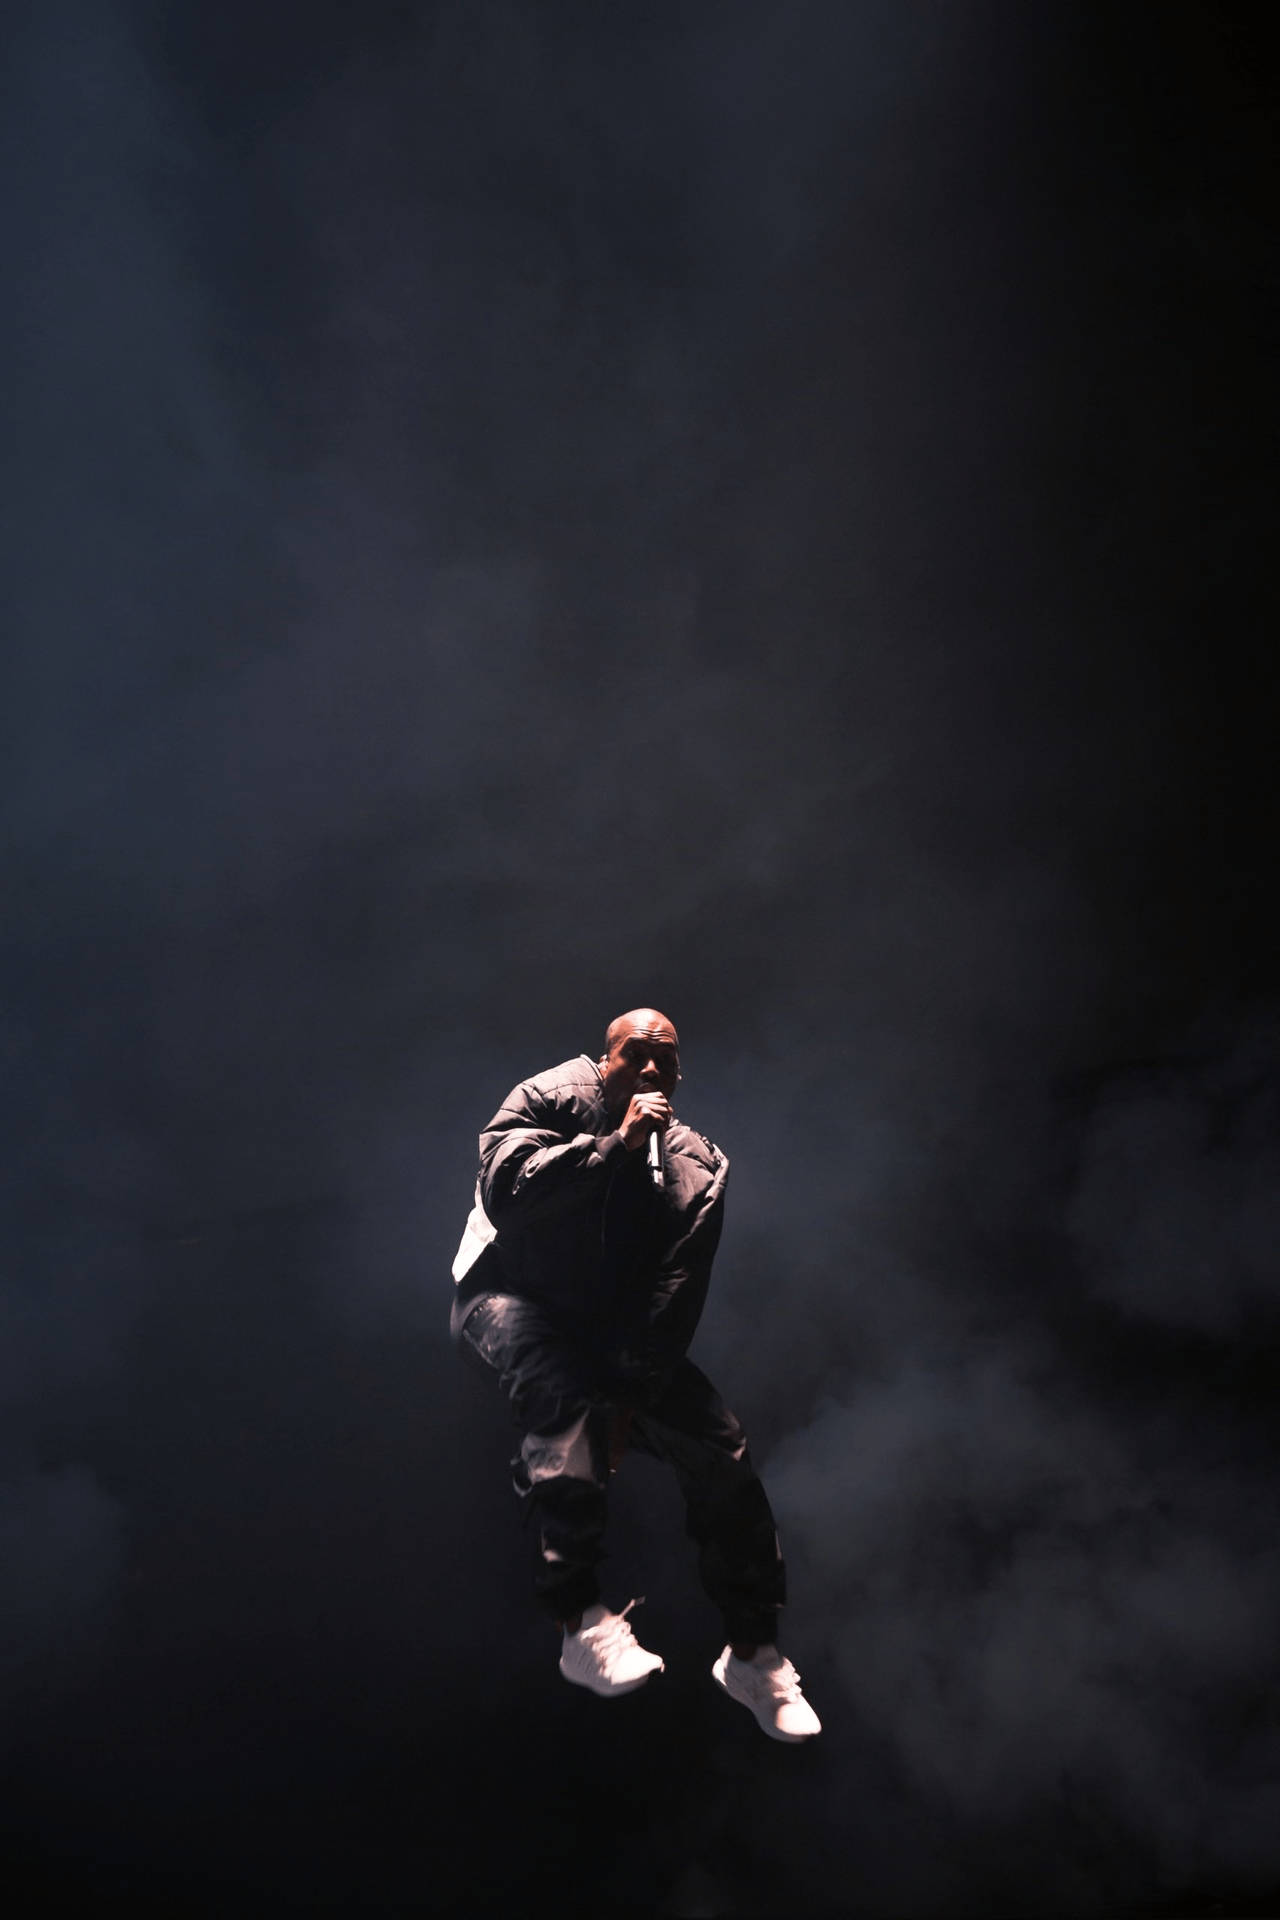 Kanye West Jumping Midair Picture